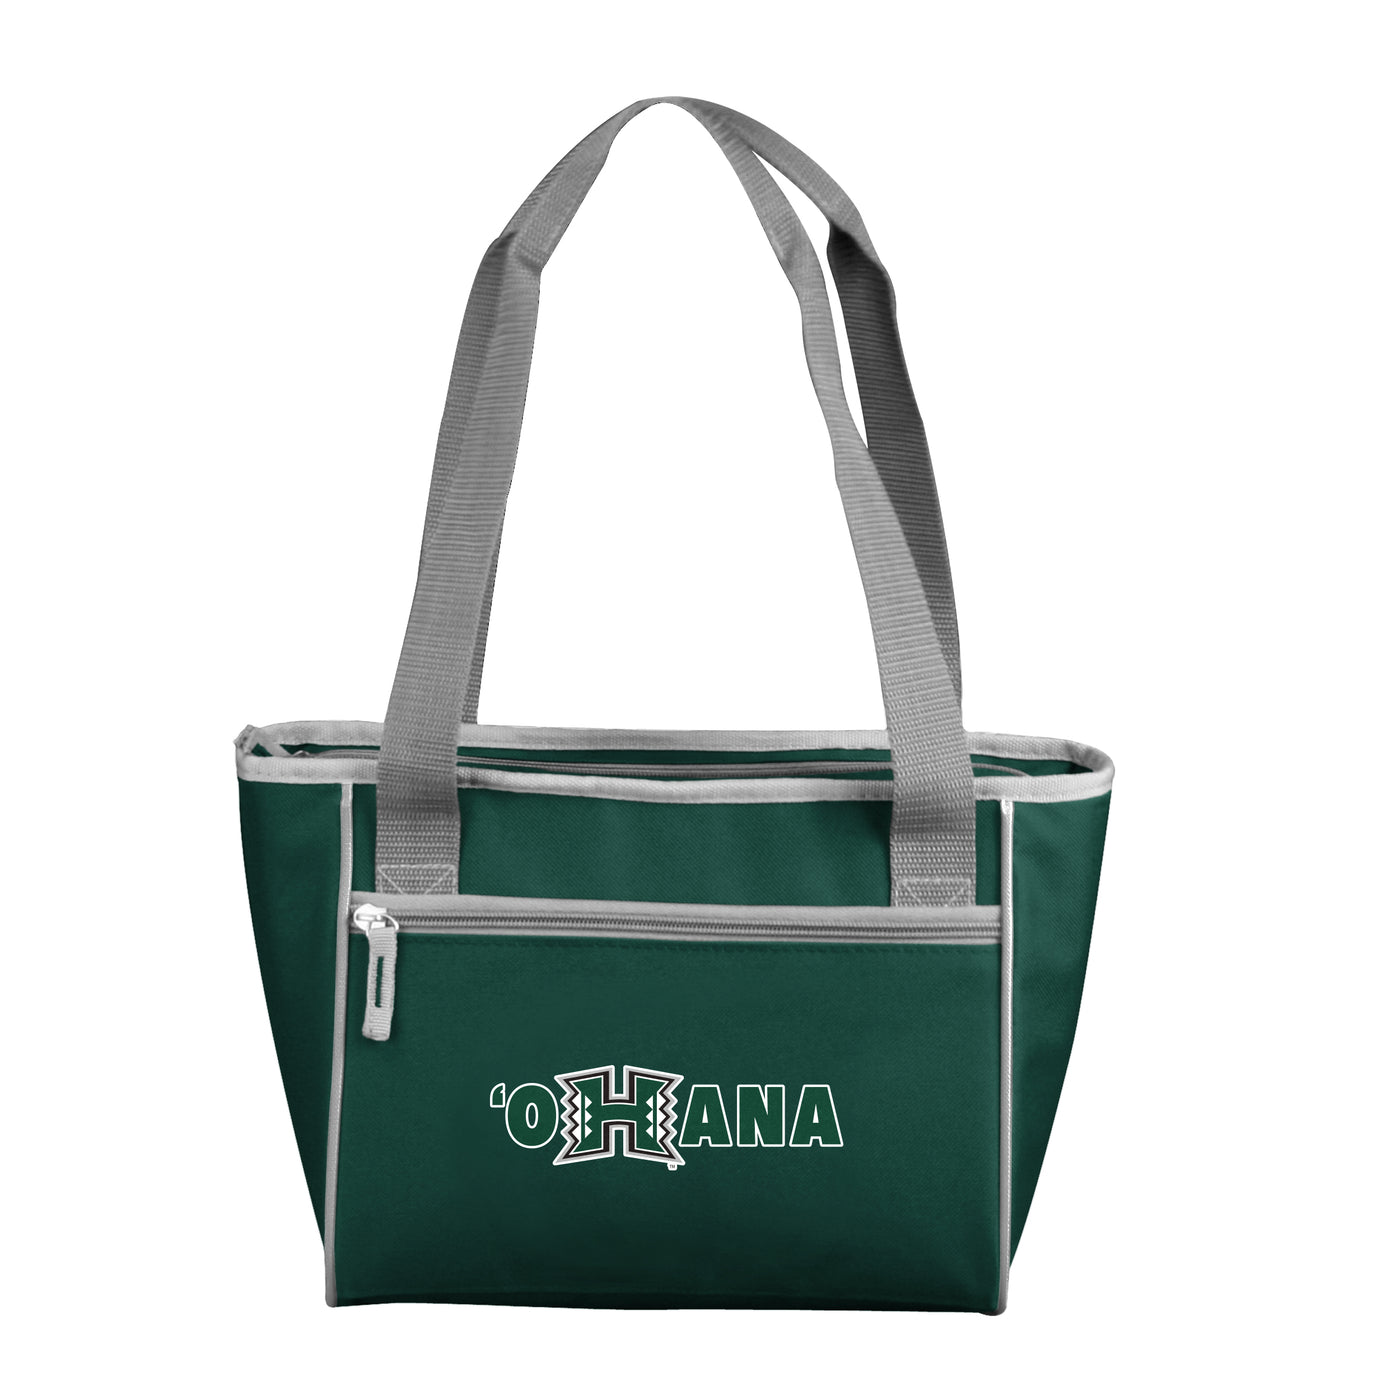 University of Hawaii - Manoa 16 Can Cooler Tote